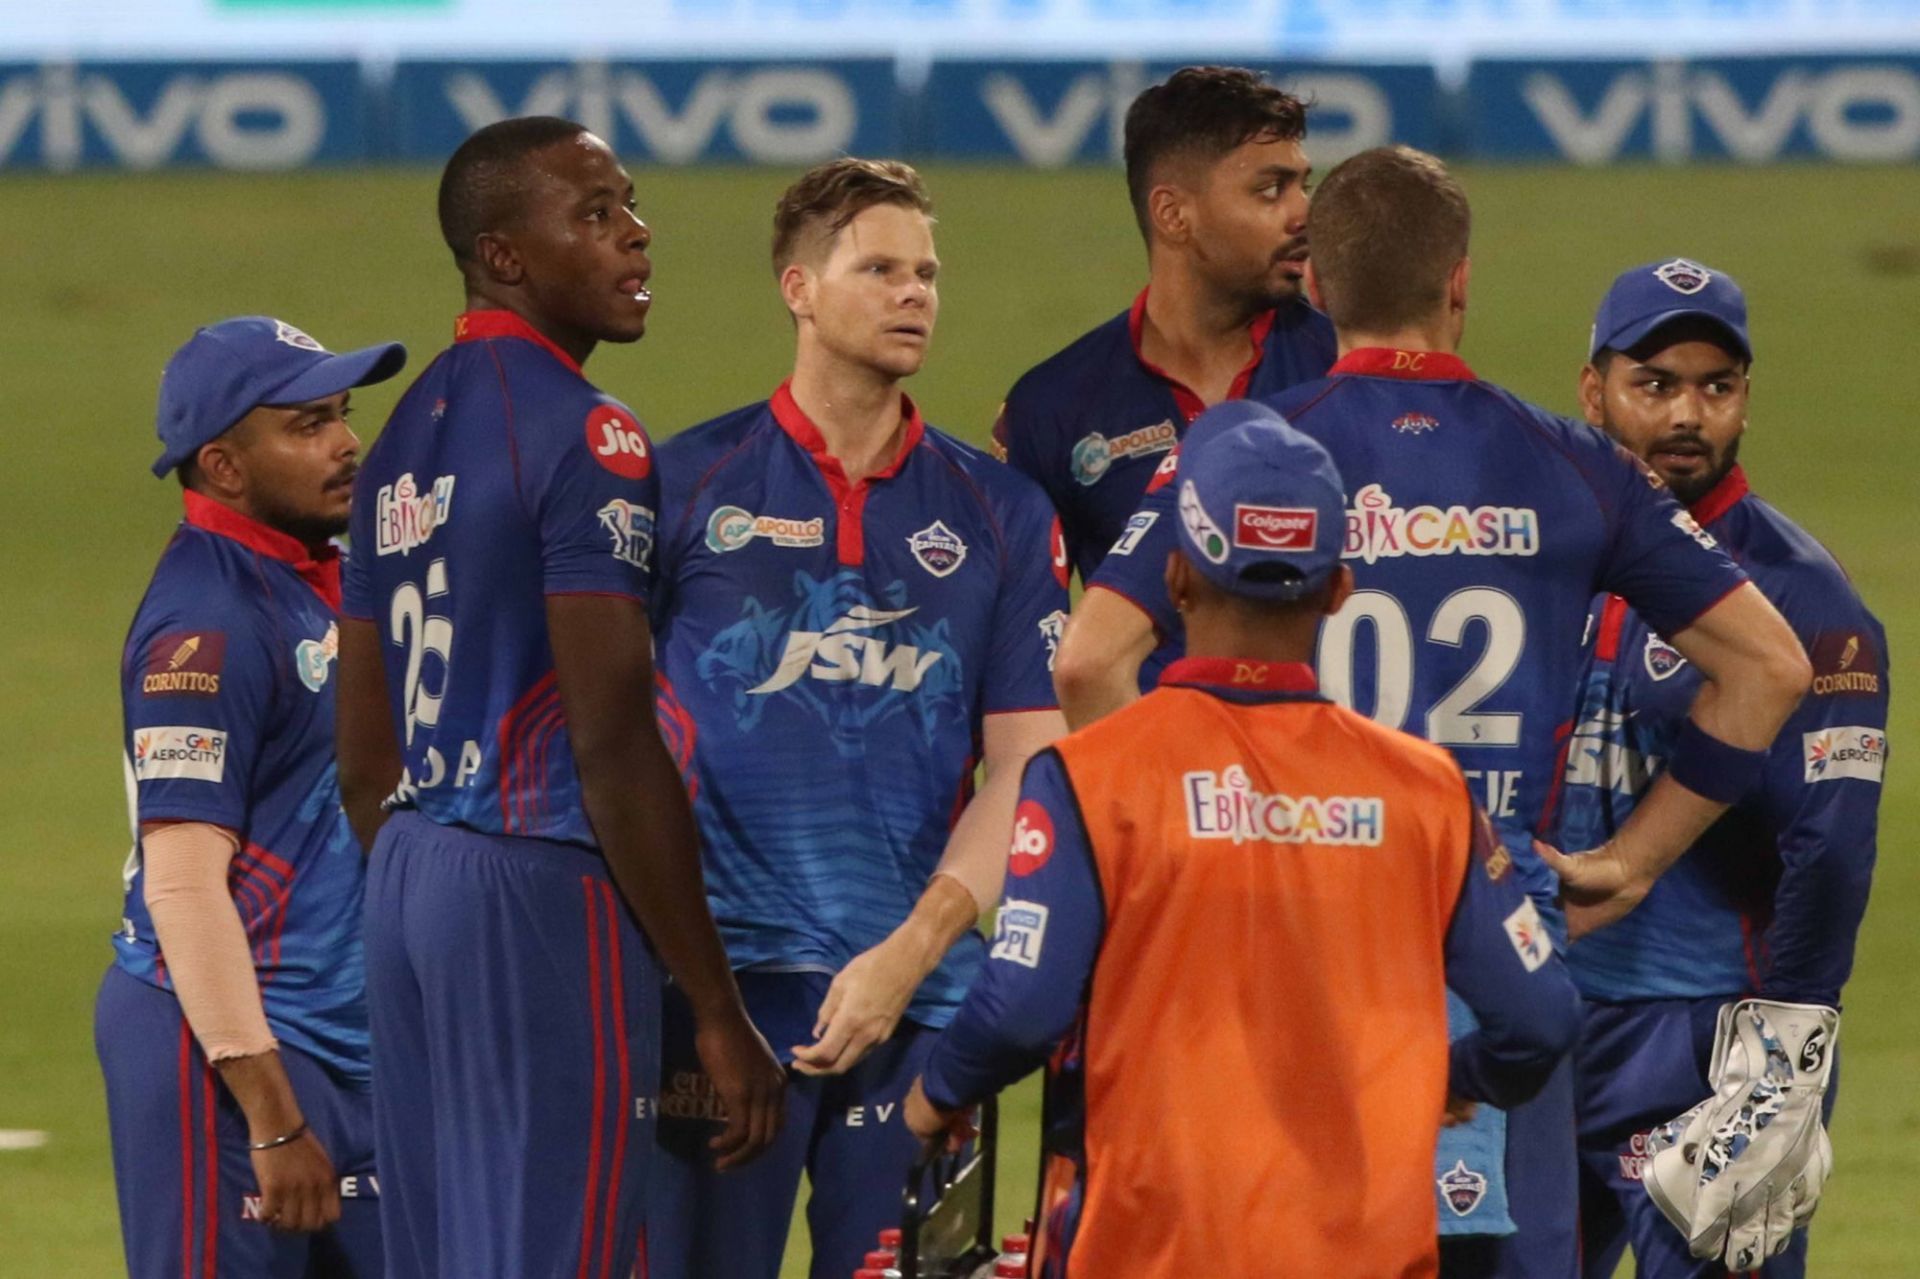 Delhi Capitals lost twice in the playoffs to crash out of IPL 2021 before the final. (Image Courtesy: IPLT20.com)